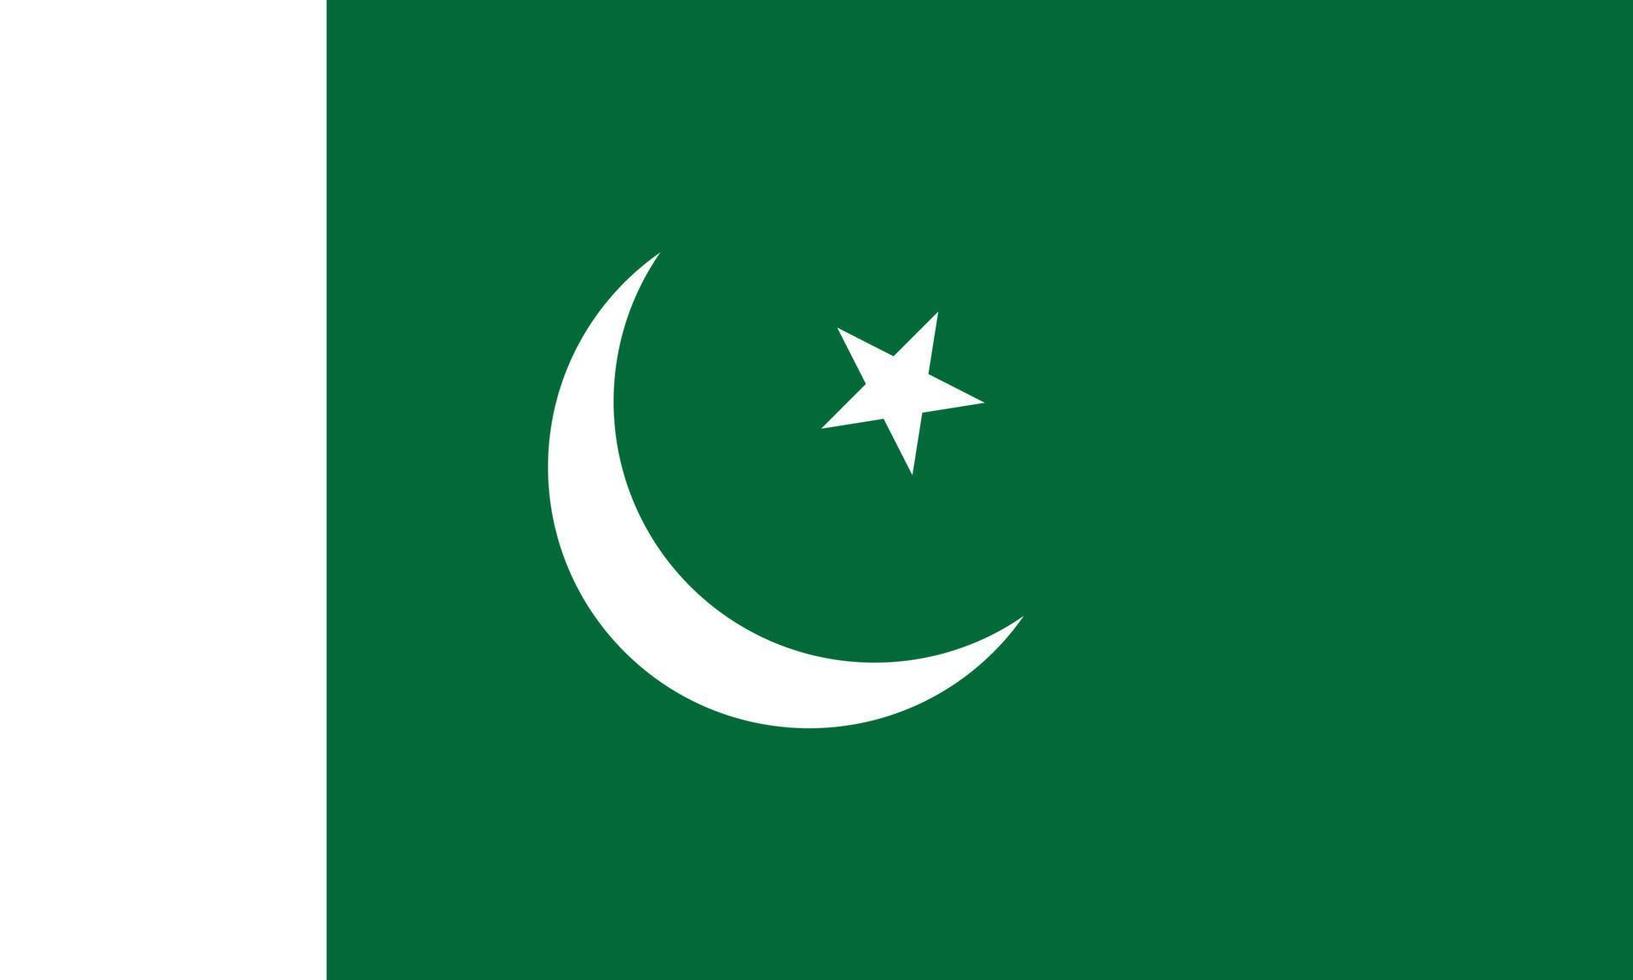 eps10 green and white vector Pakistan flag with moon and star icon Pakistani flag symbol in a simple flat trendy modern style for your website design, logo, pictogram, UI, and mobile application